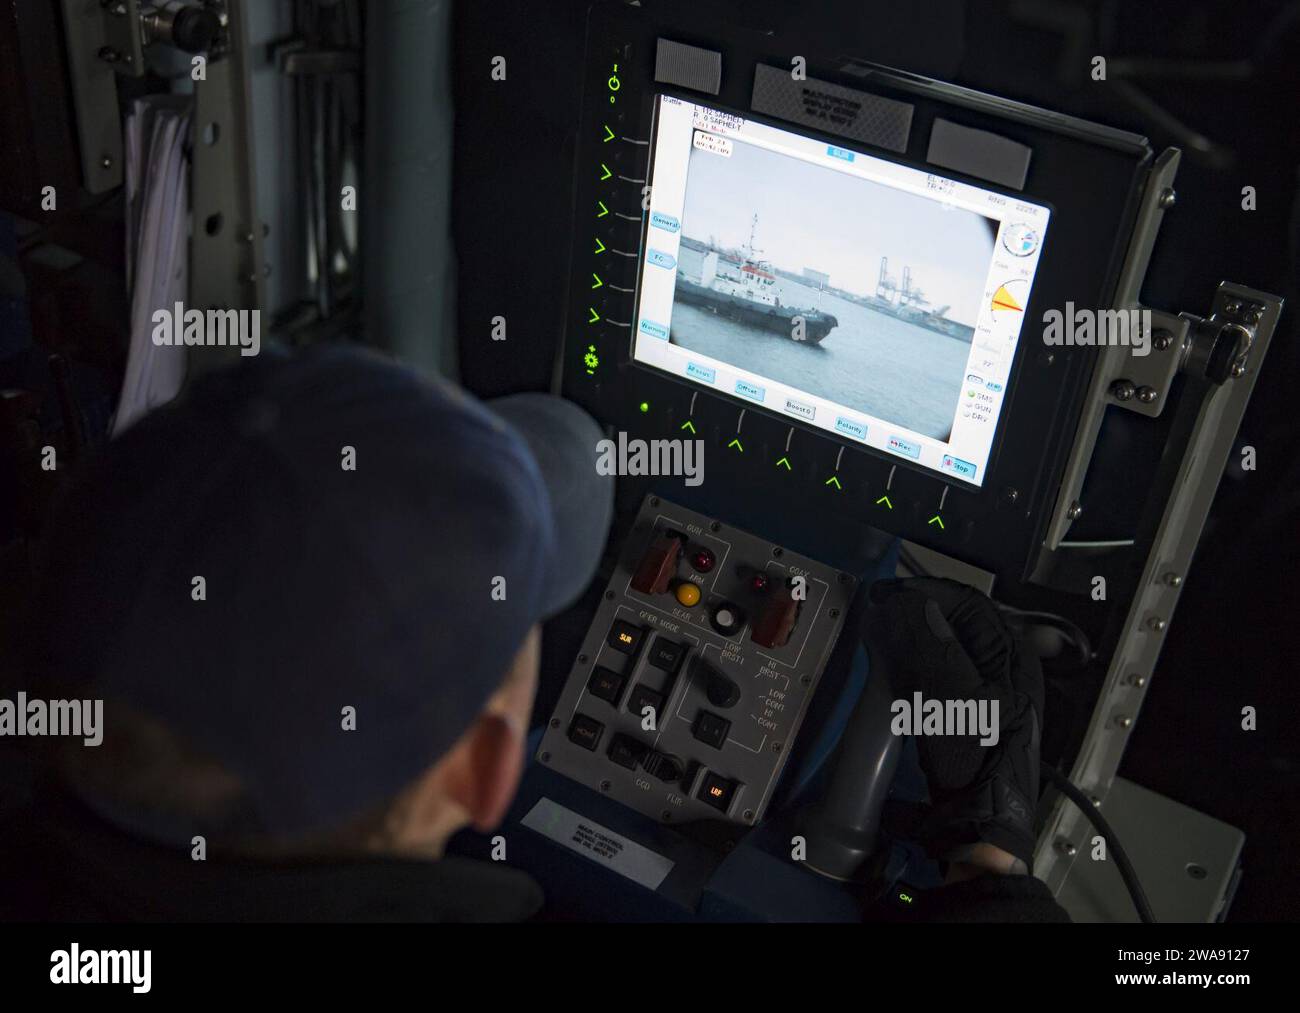 US military forces. 180221RG482-111  CONSTANTA, Romania (Feb. 21, 2018) Gunner's Mate 2nd Class Tre Fry mans the remote console that controls a 25 mm gun aboard the Arleigh Burke-class, guided-missile destroyer USS Ross (DDG 71) as the ship gets underway from Constanta, Romania, Feb. 21, 2018. Ross, forward-deployed to Rota, Spain, is on its sixth patrol in the U.S. 6th Fleet area of operations in support of regional allies and partners and U.S. national security interests in Europe. (U.S. Navy photo by Mass Communication Specialist 1st Class Kyle Steckler/Released) Stock Photo